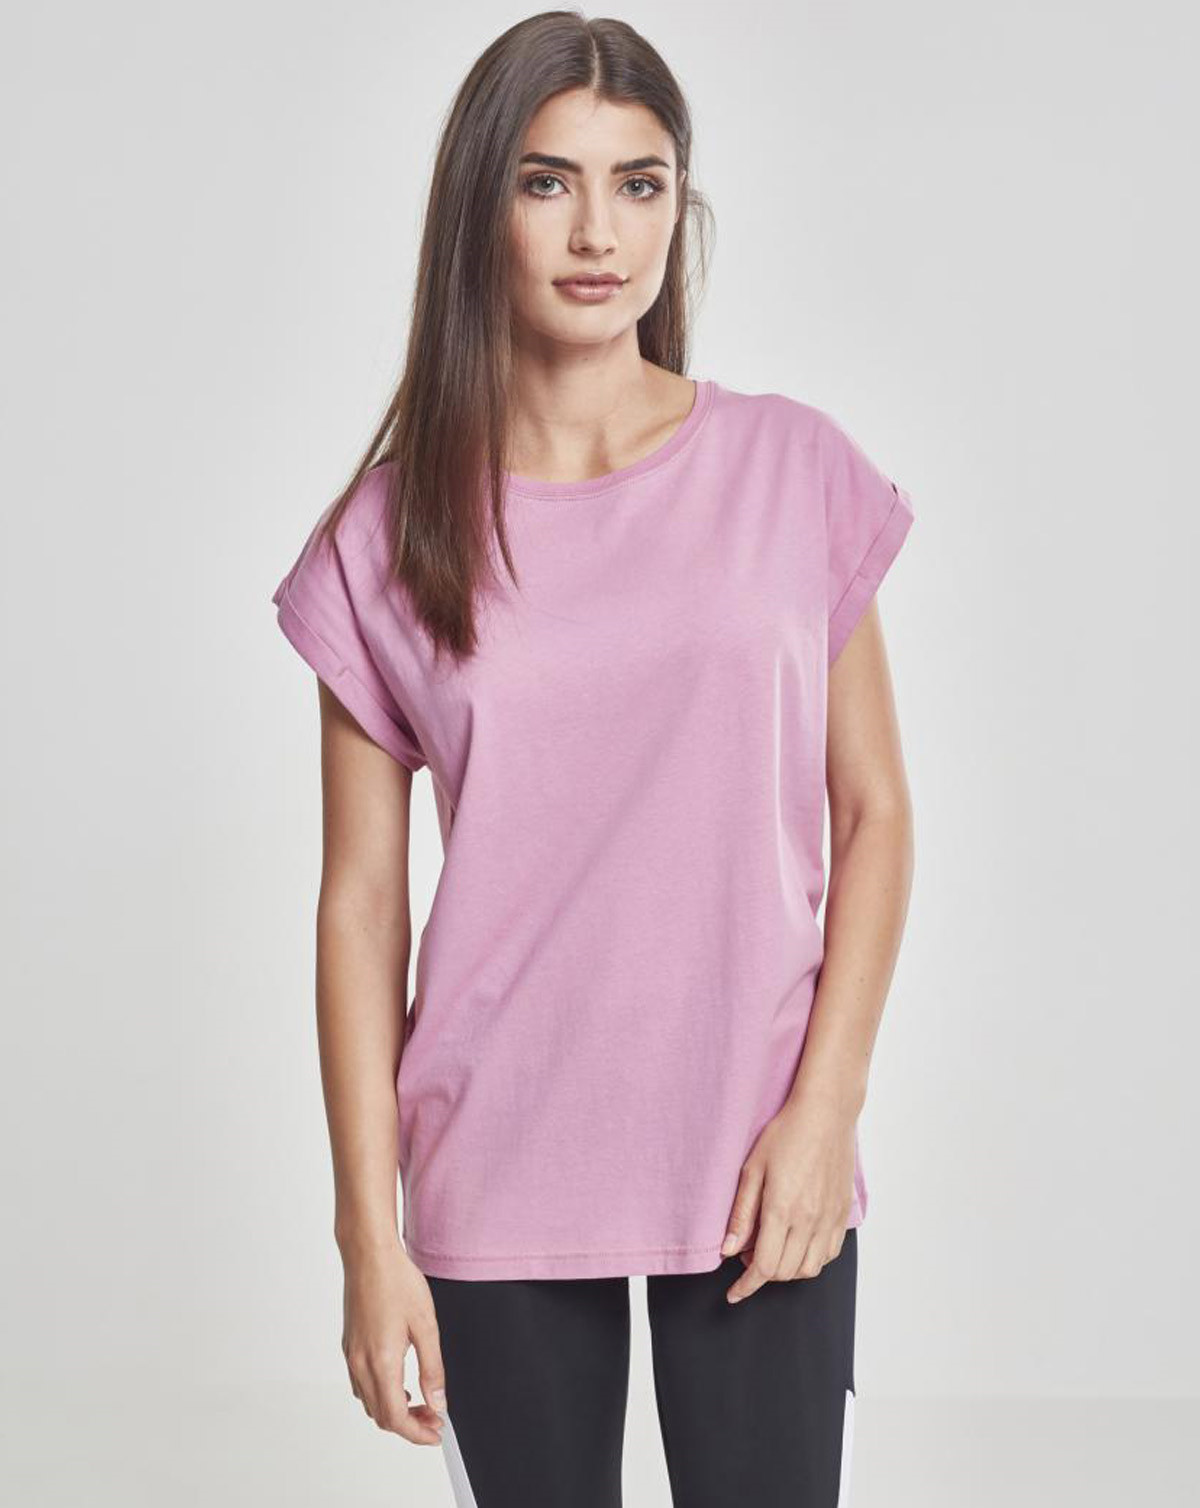 Urban Classics Ladies Extended Shoulder Tee (Cool Pink, M)